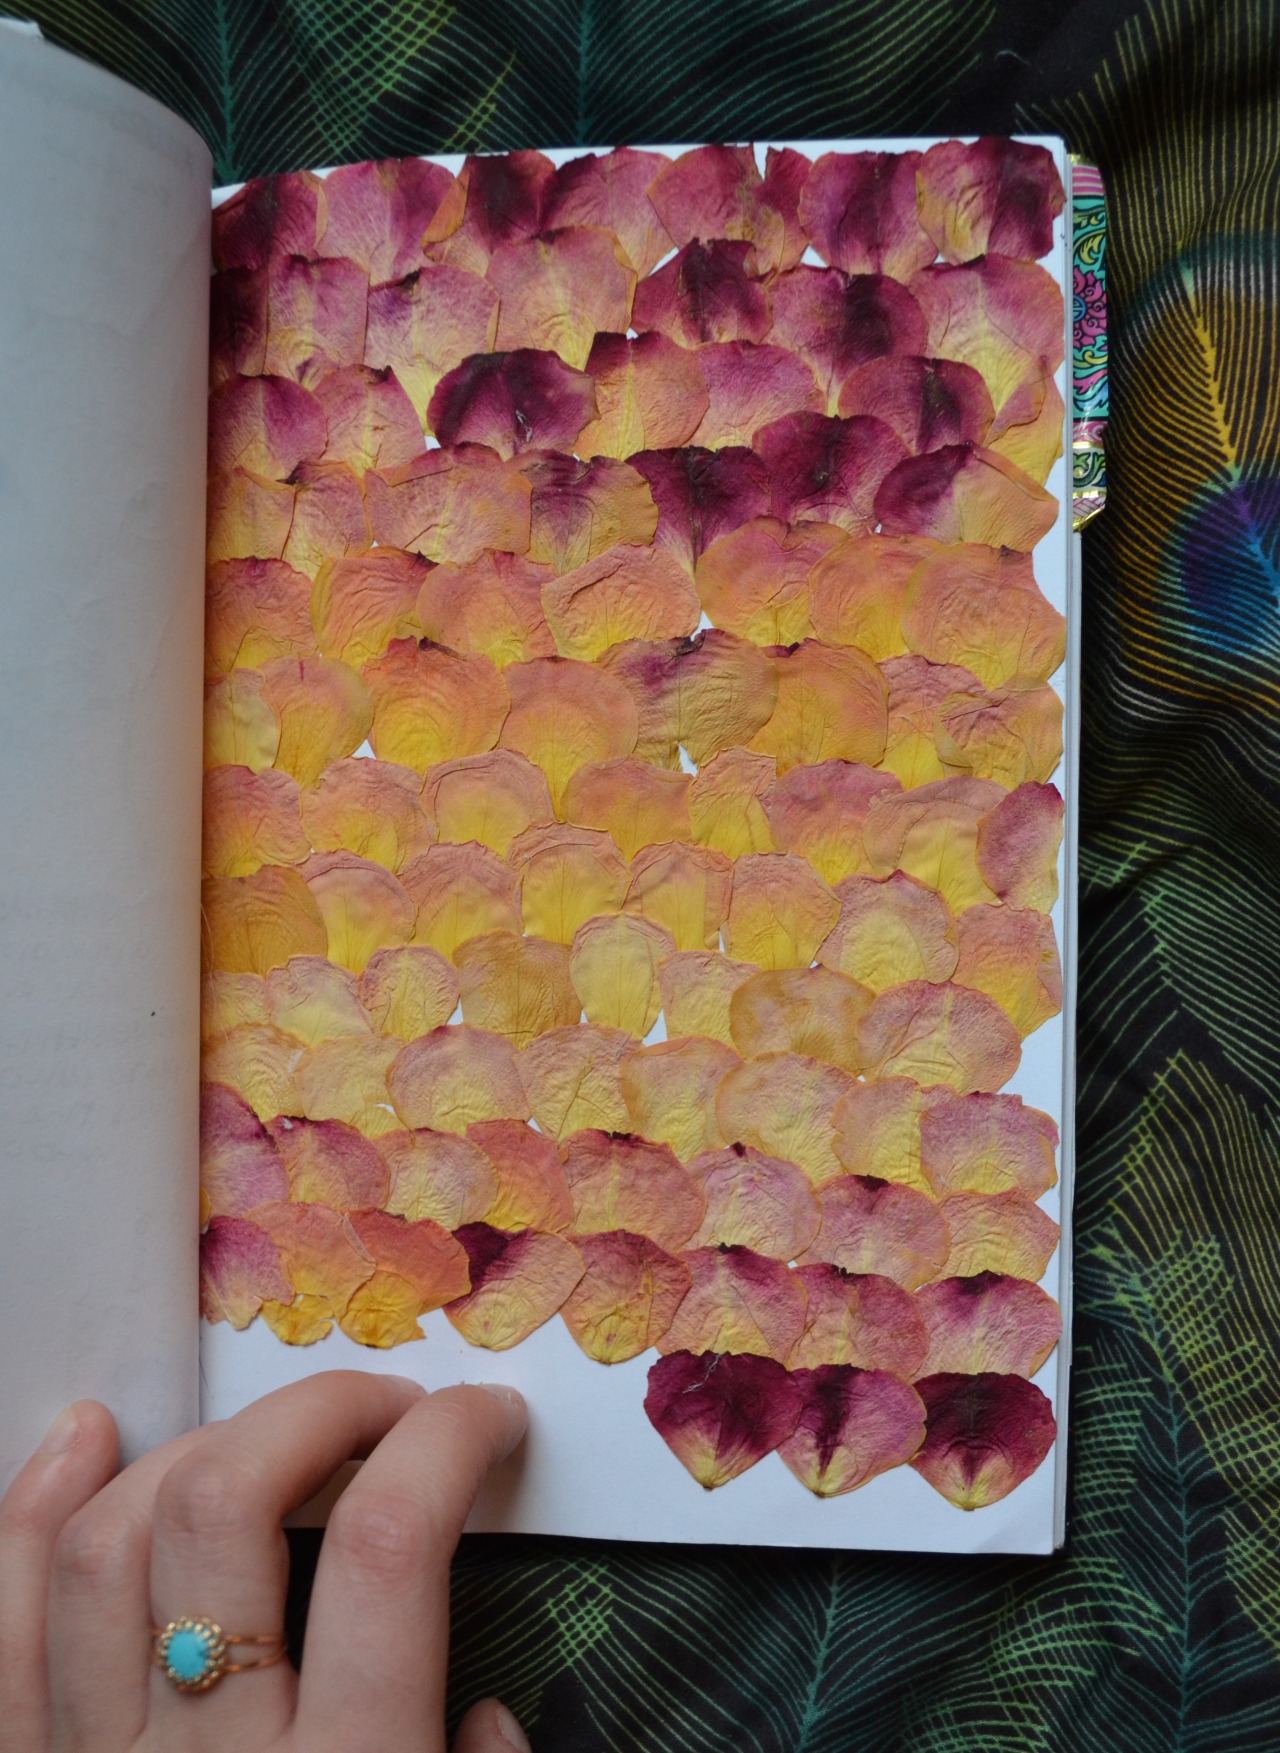 chic-ahh-go:  Sketchbook Page 59 Pressed rose petals. I had a giant bouquet of dead,